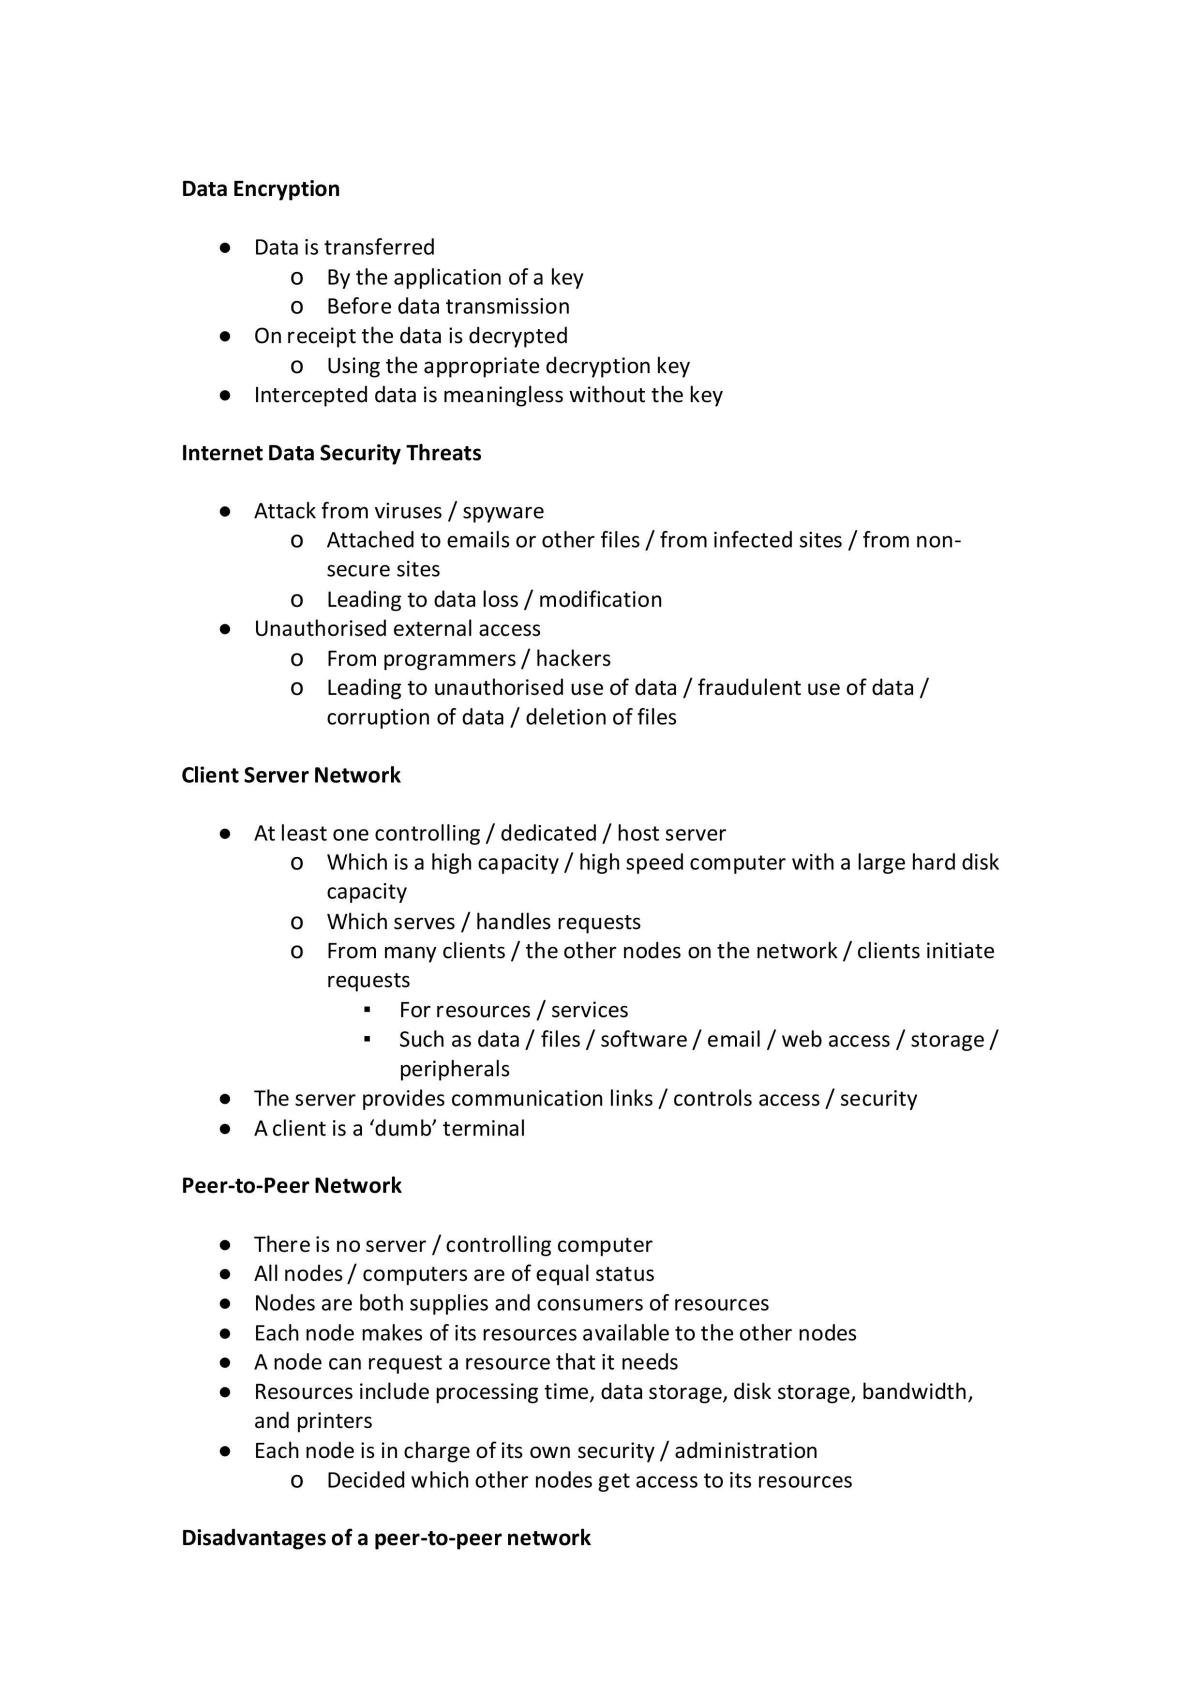 A2 Level IT notes  - Page 22